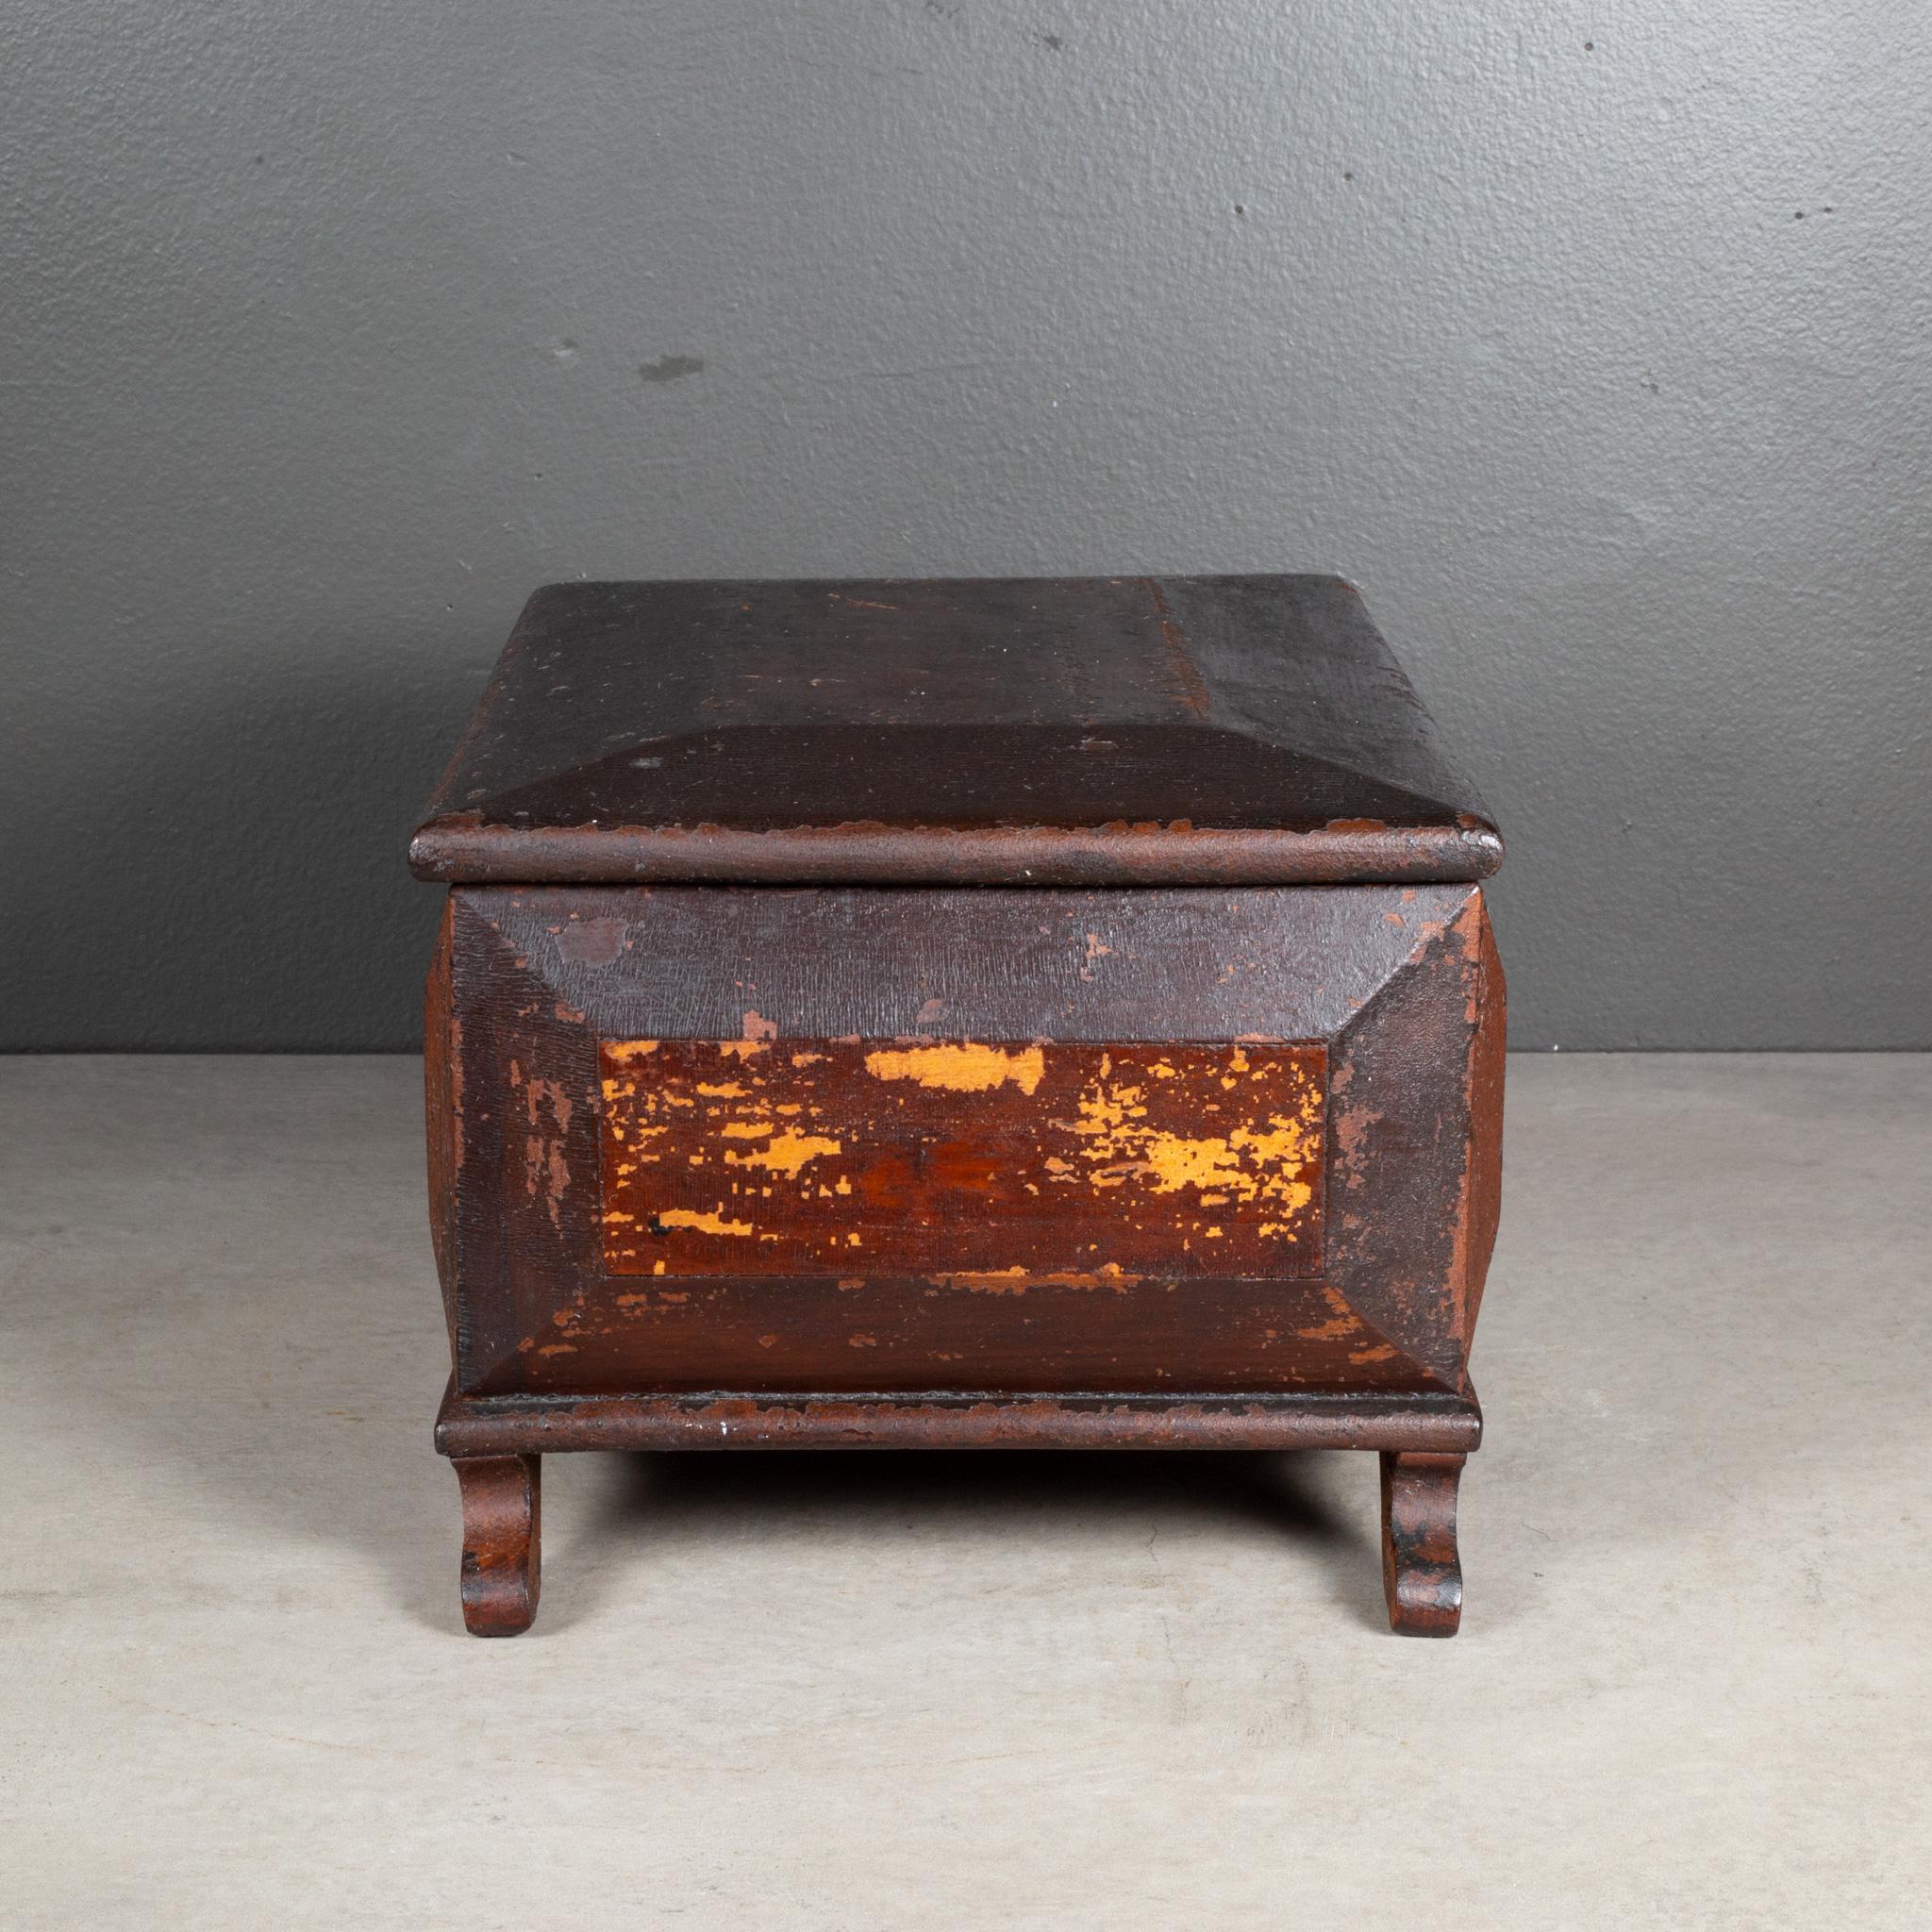 19th c. Distressed Scroll-Footed Box In Good Condition For Sale In San Francisco, CA